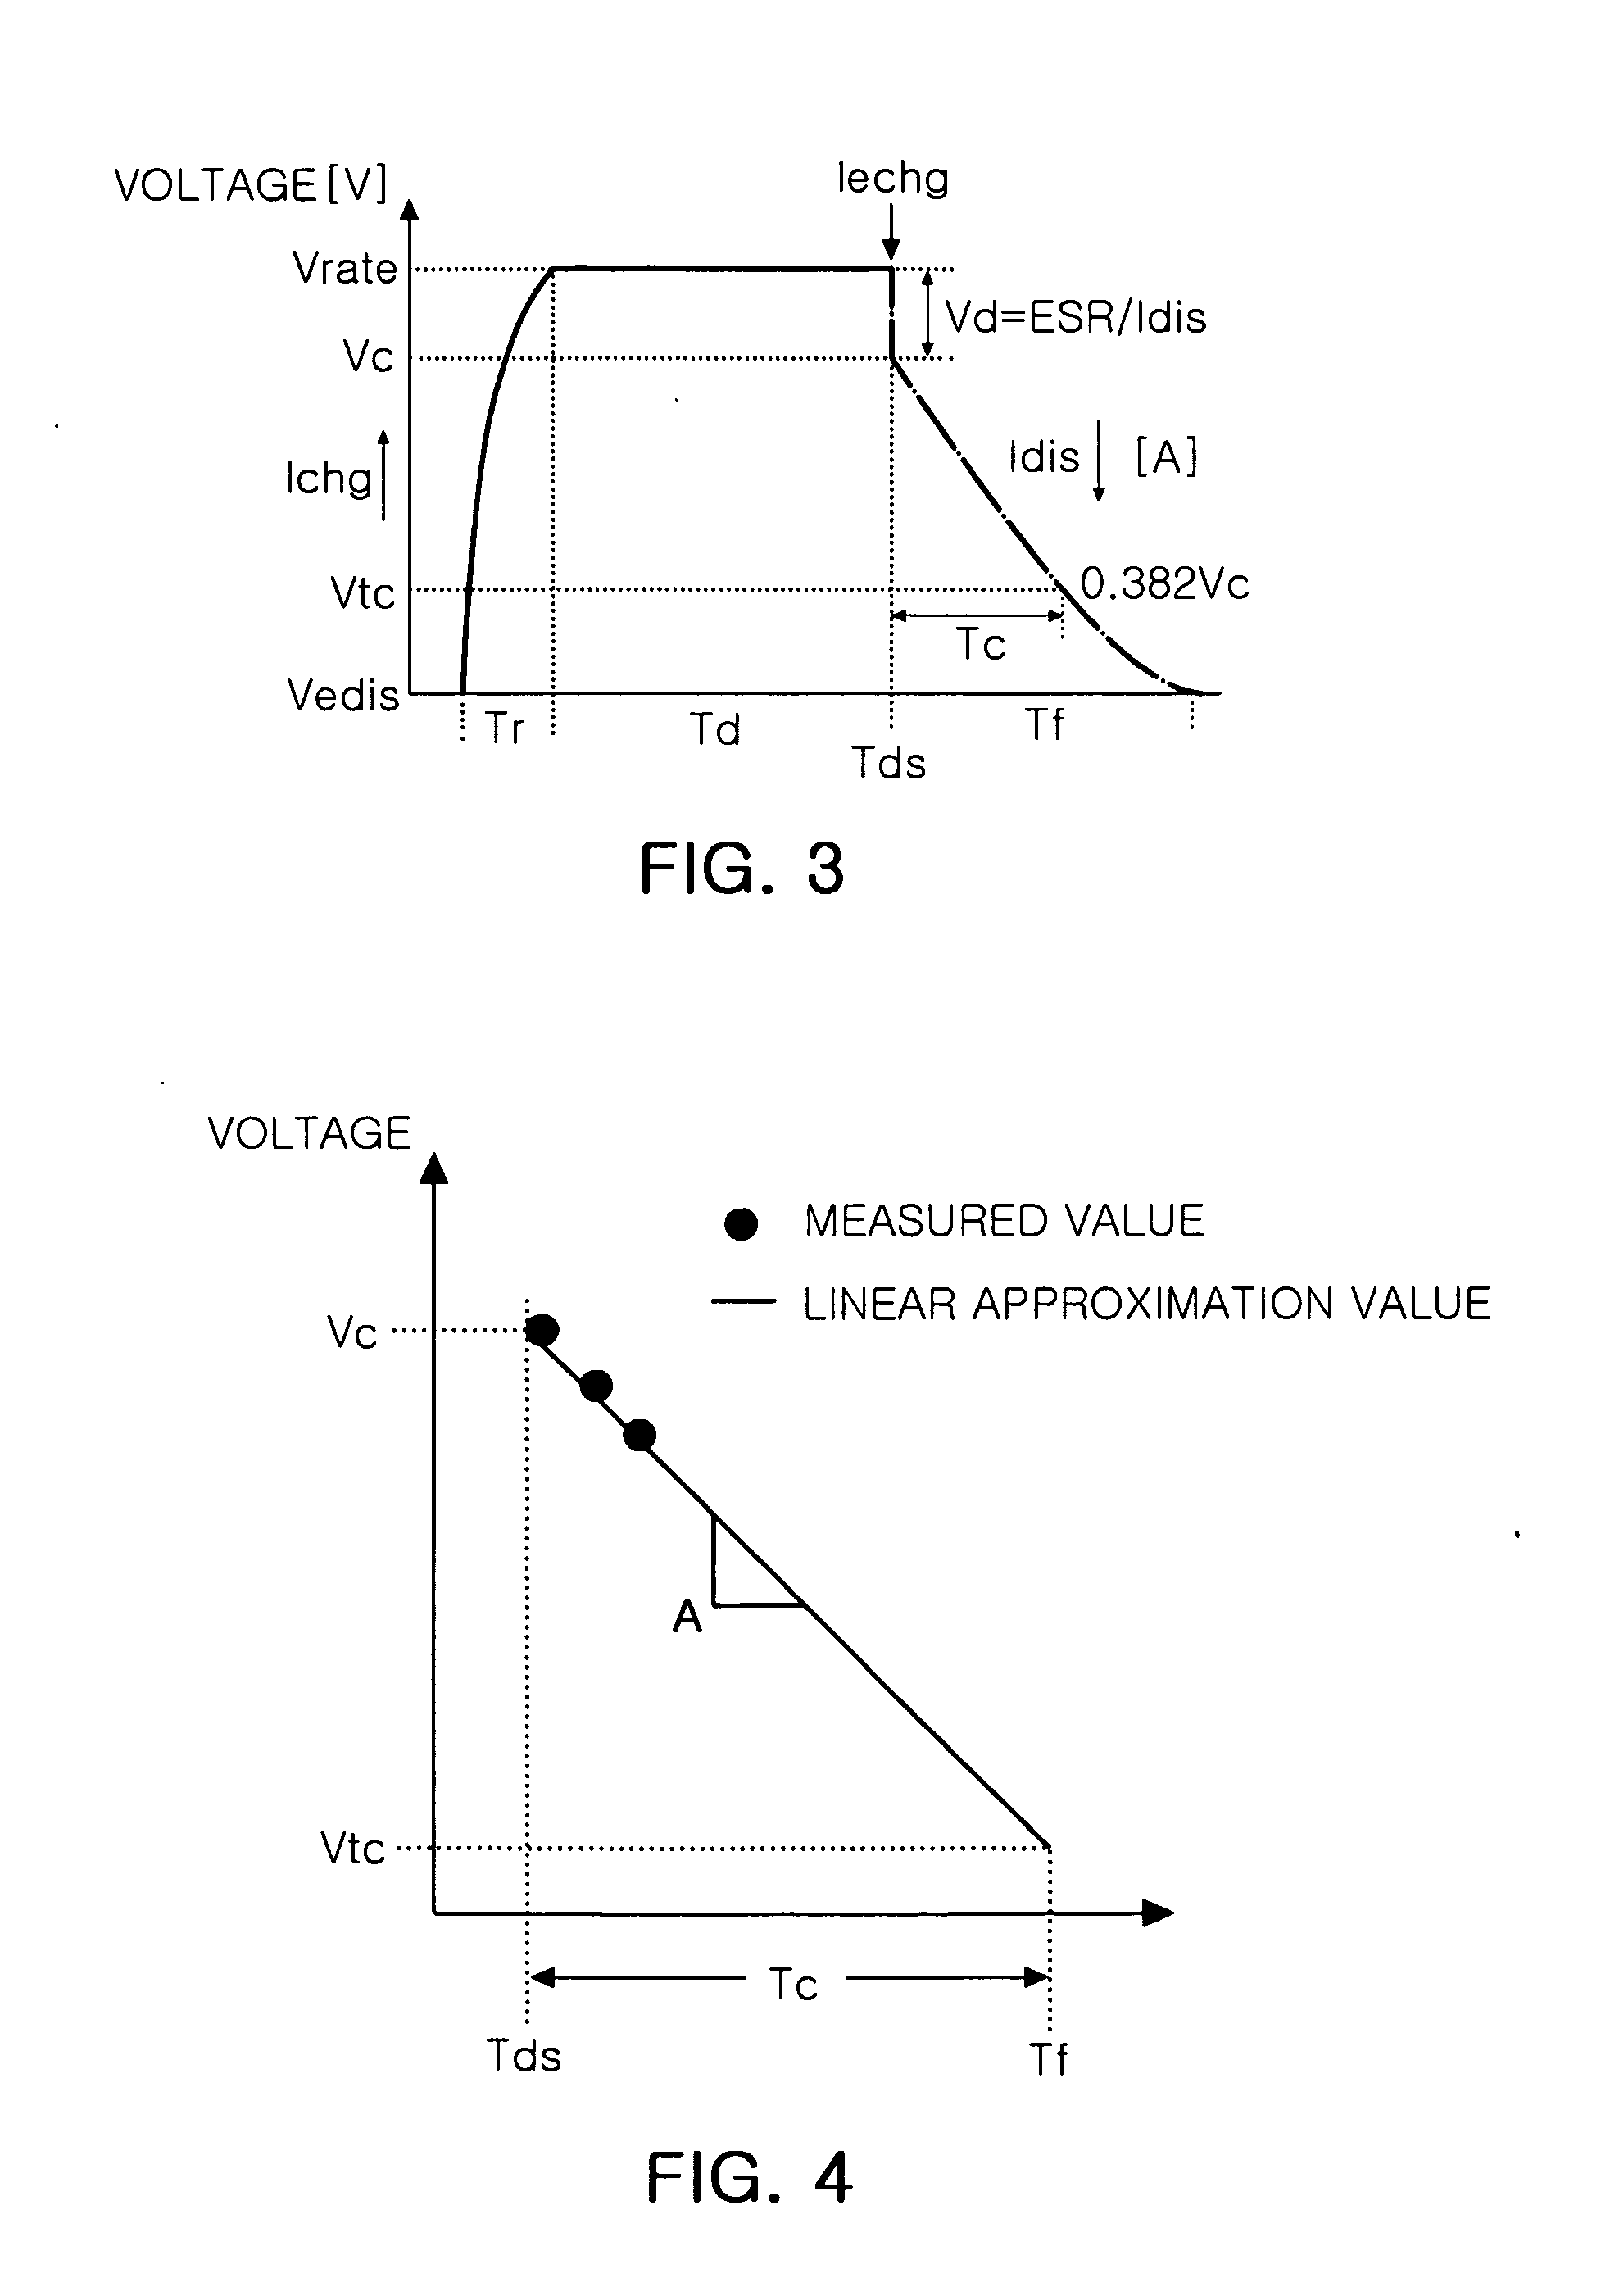 Apparatus and method for evaluating capacitor